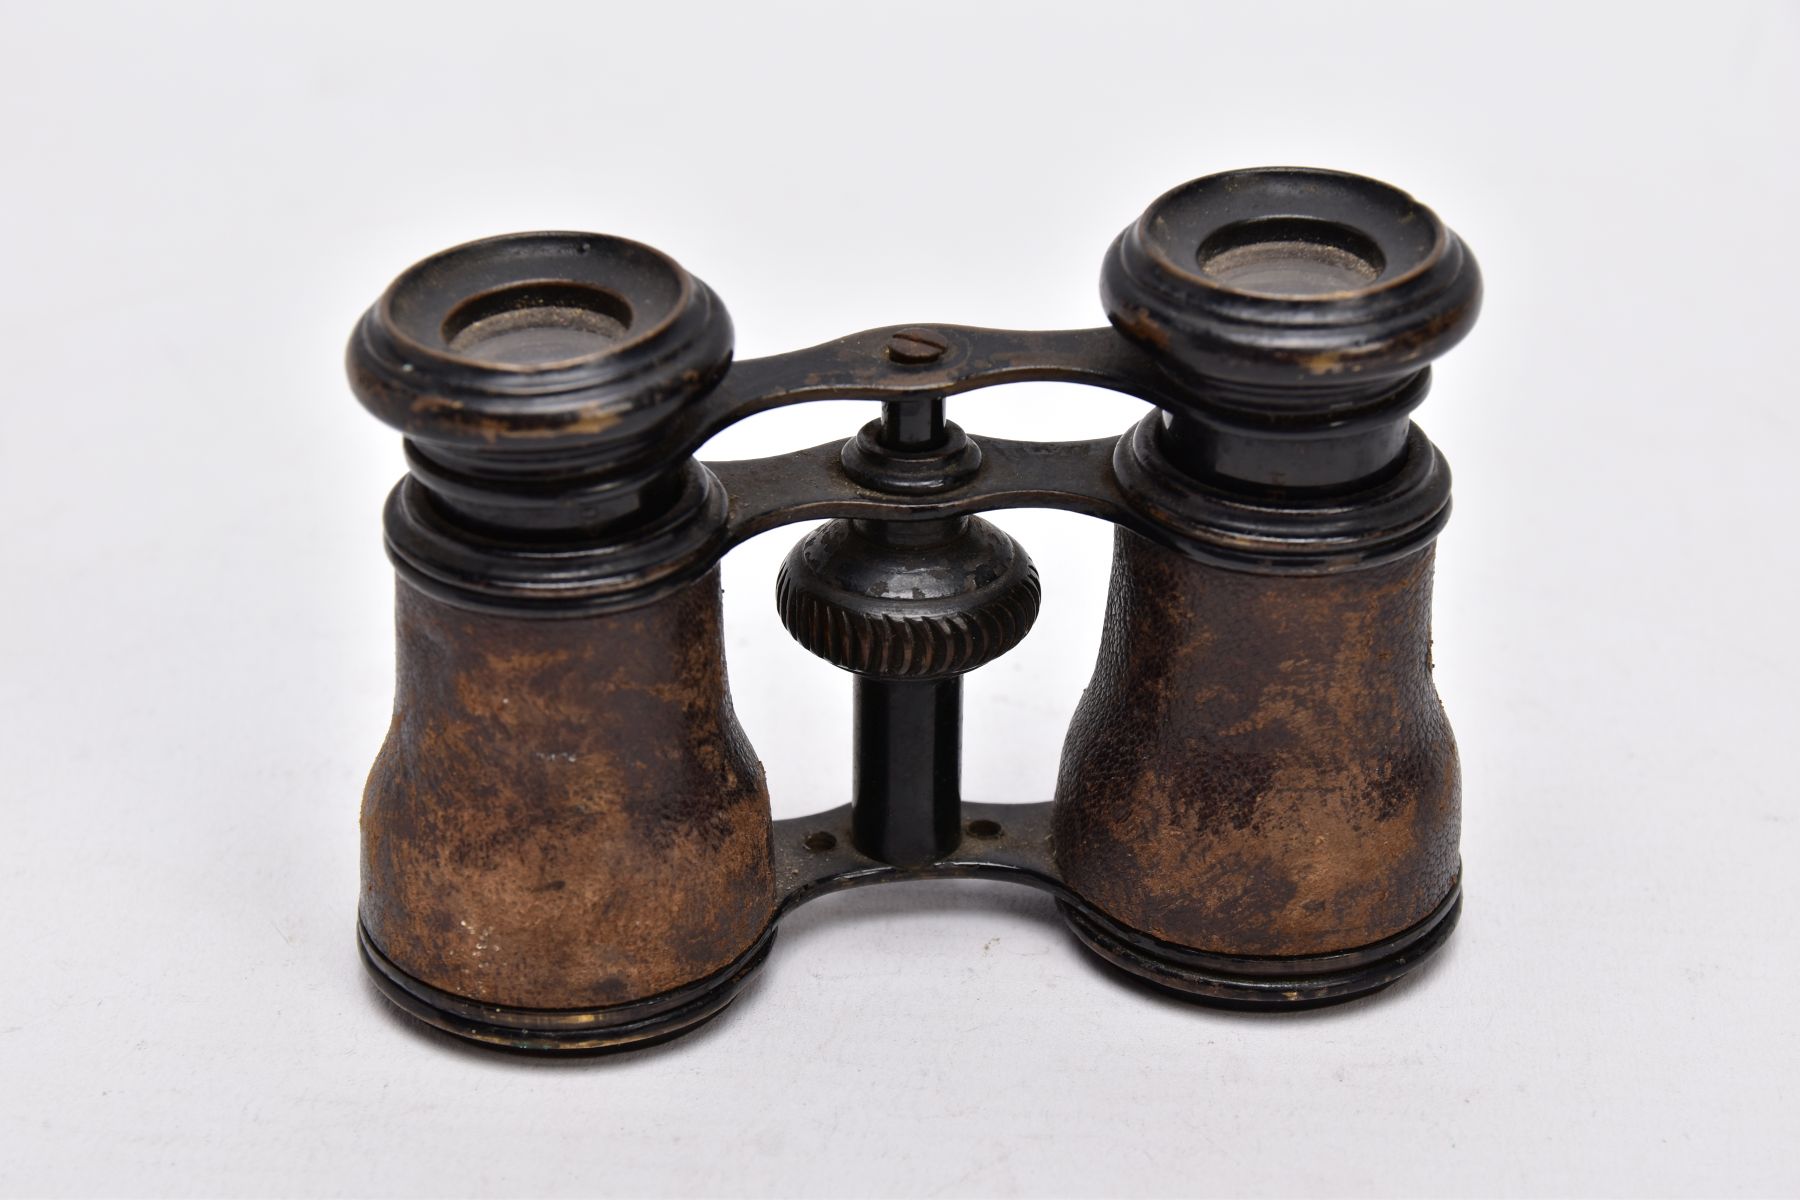 A PAIR OF EARLY 20TH CENTURY OPERA GLASSES, leather cased objective barrels, central focus wheel - Image 3 of 6